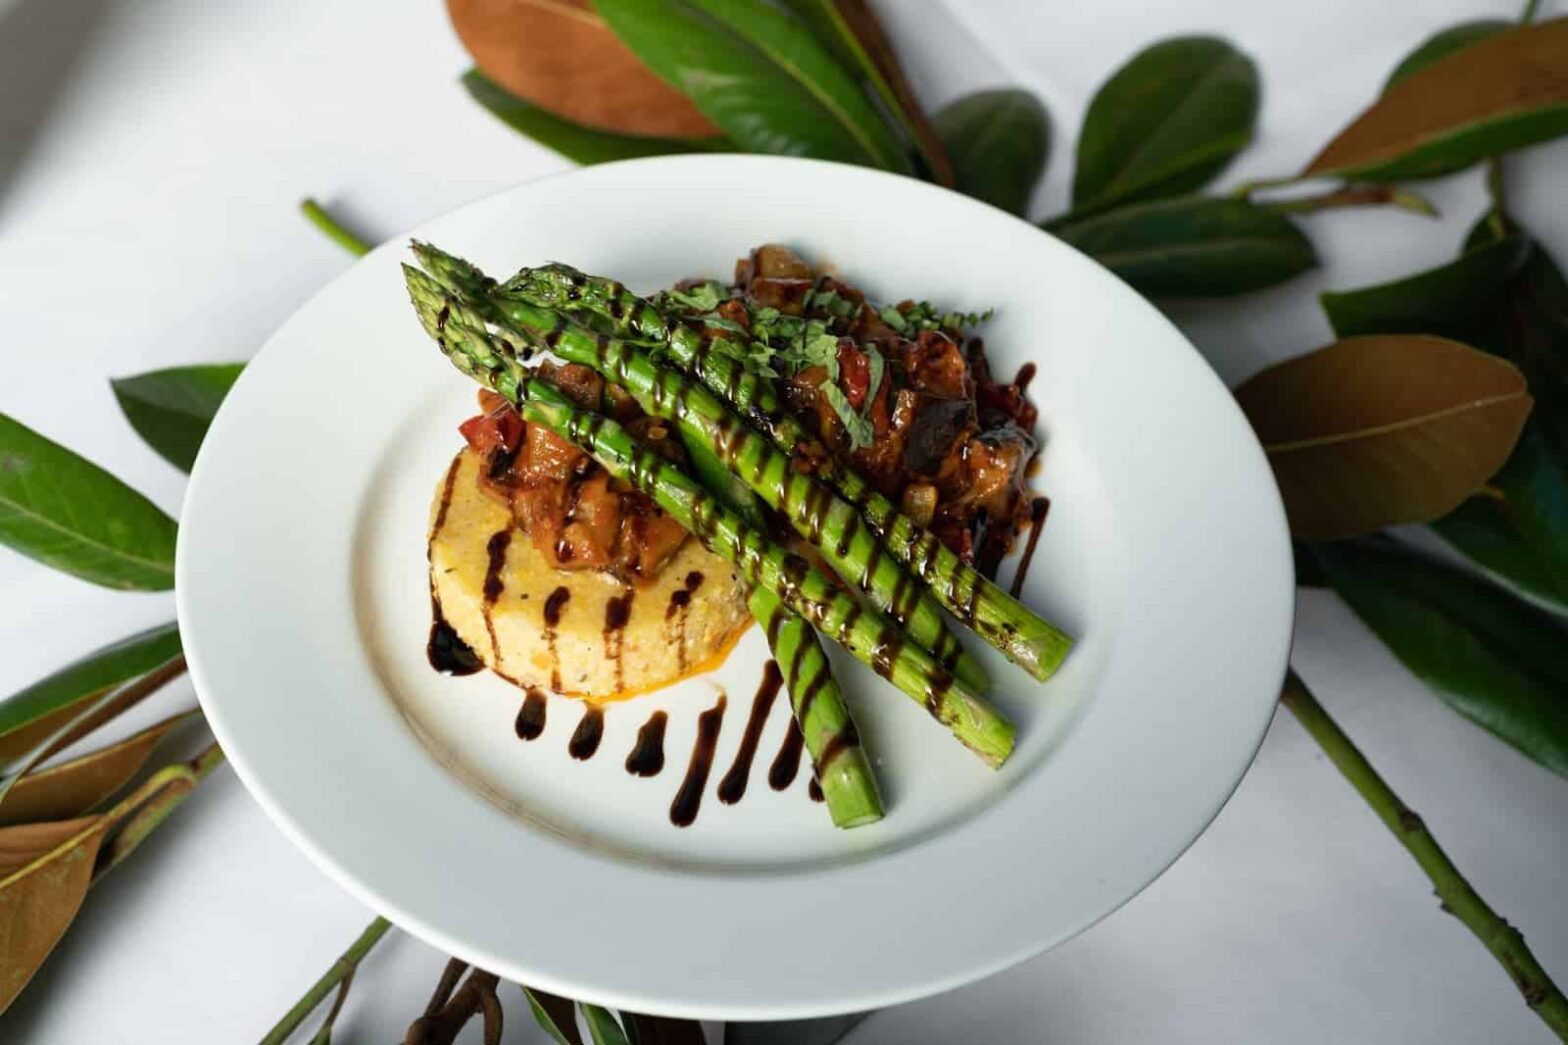 entree meal with asparagus